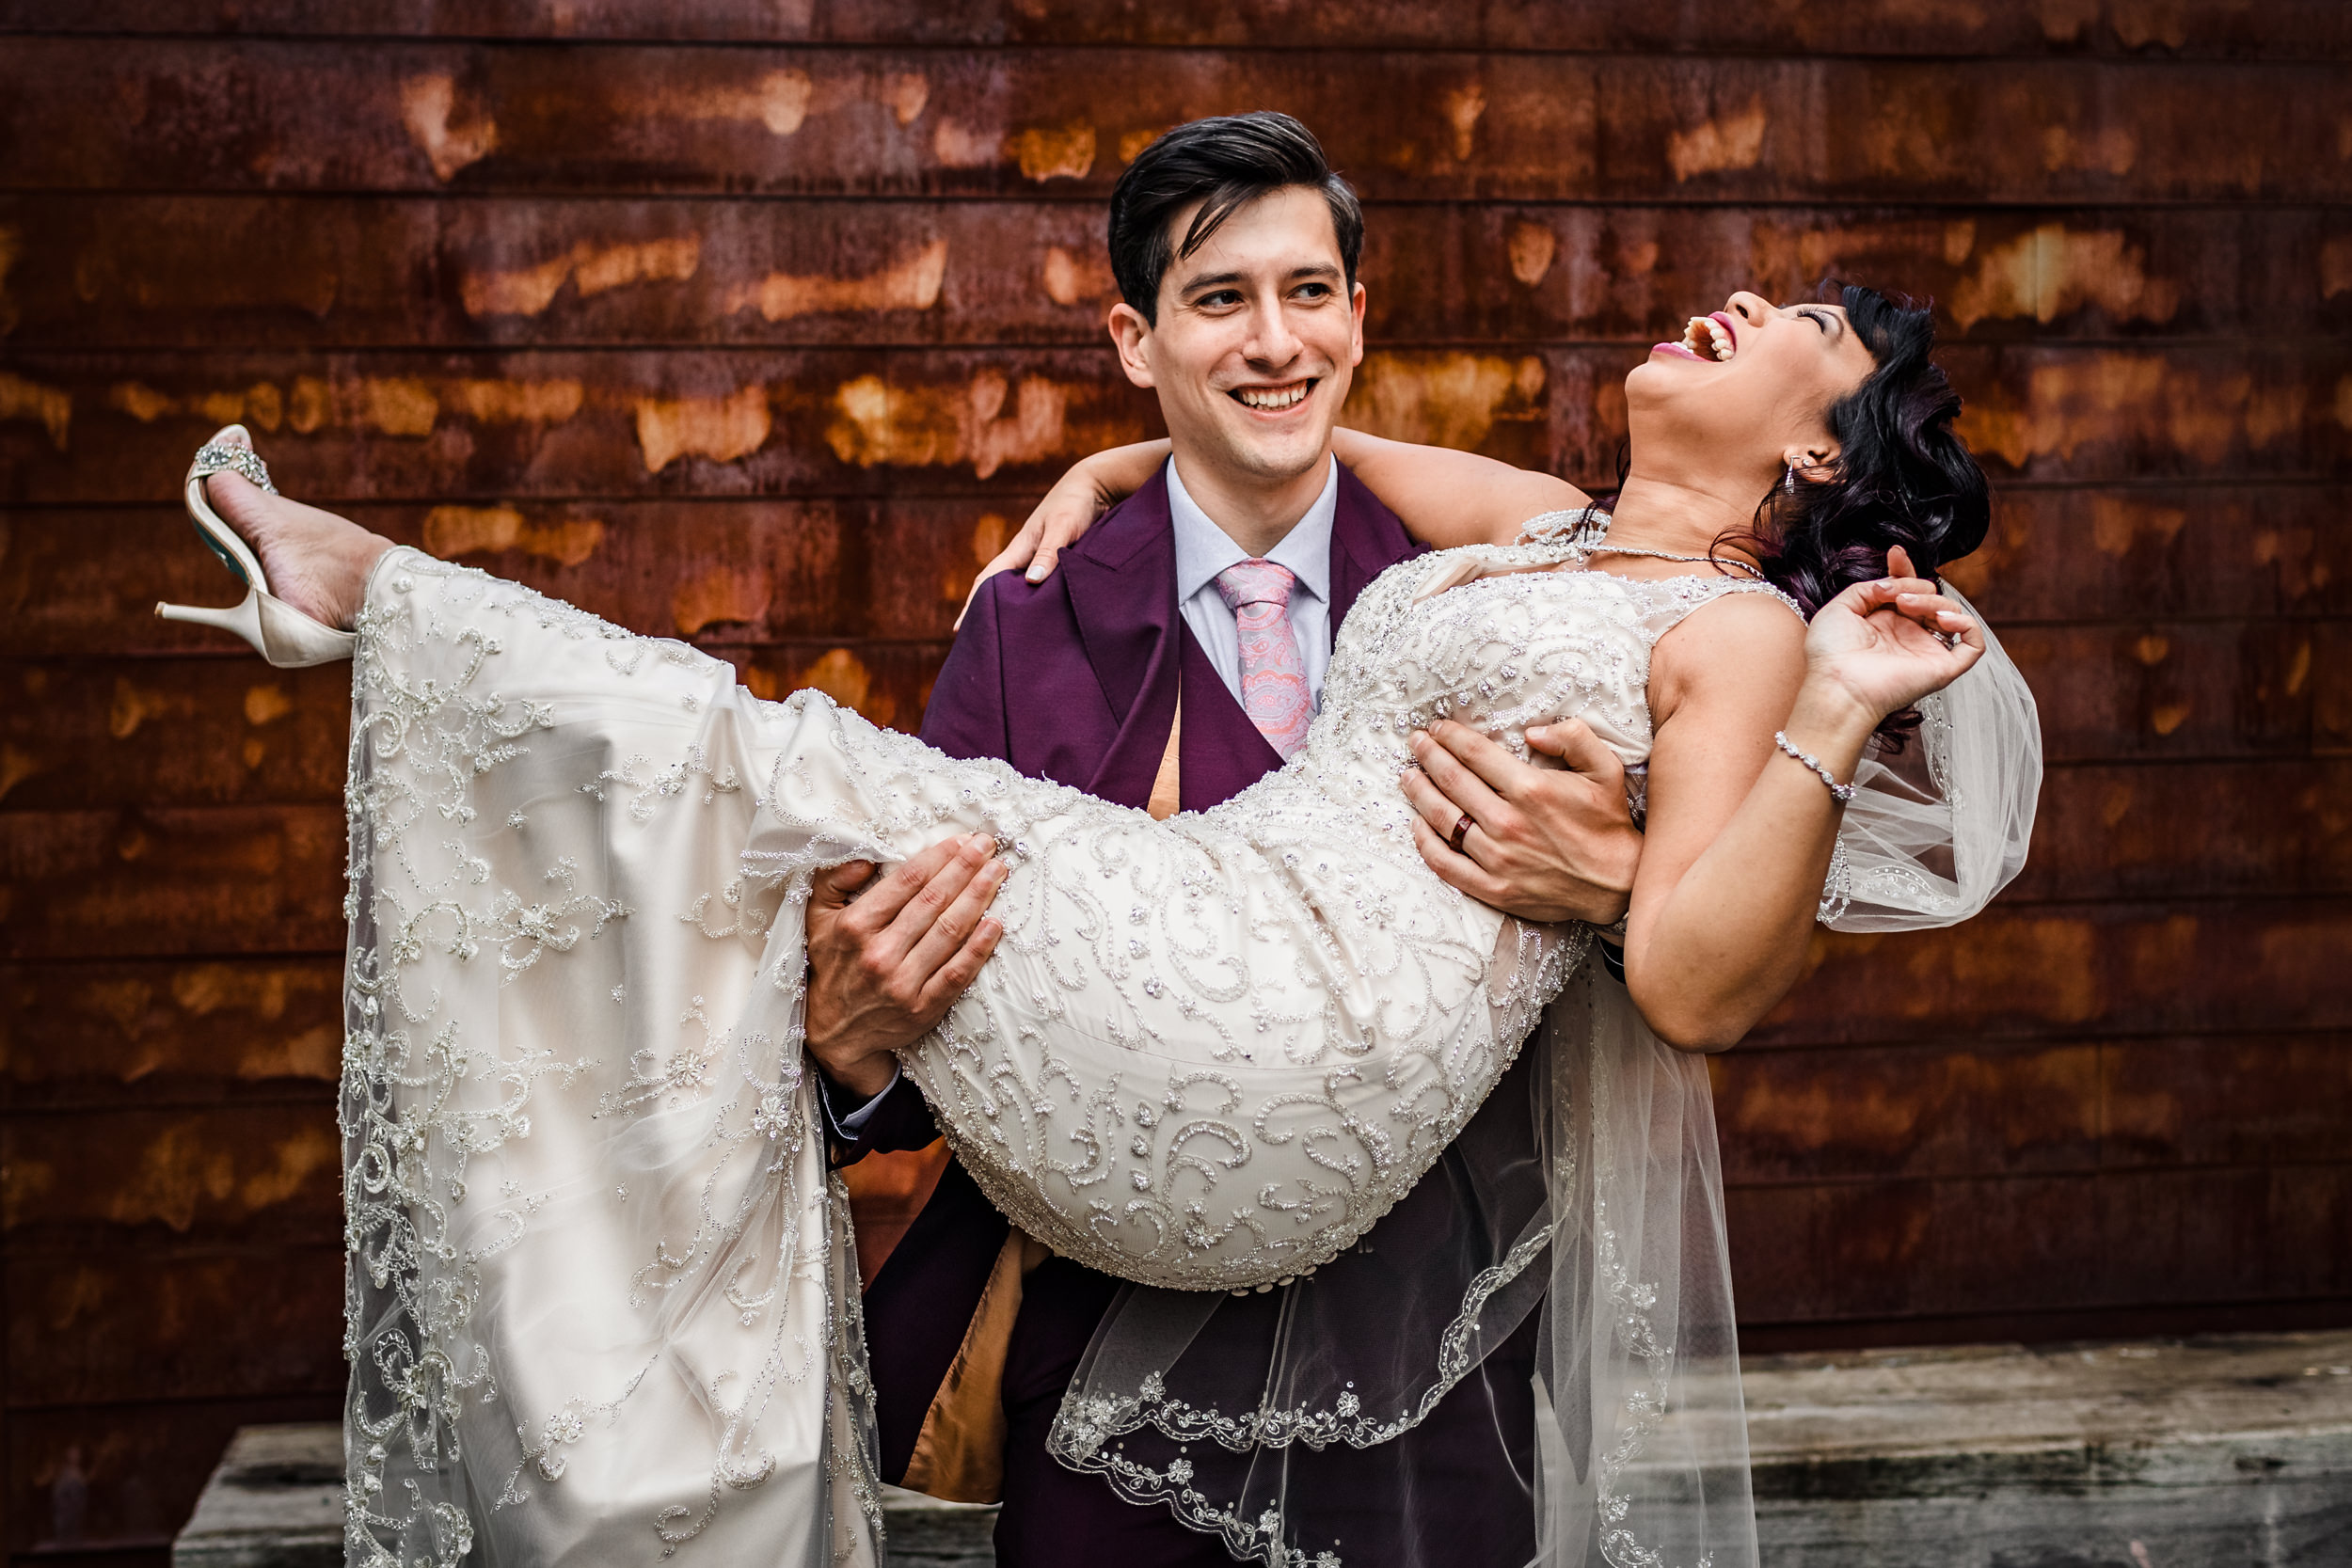 A groom carries his bride while laughing together after their wedding at The Joinery.